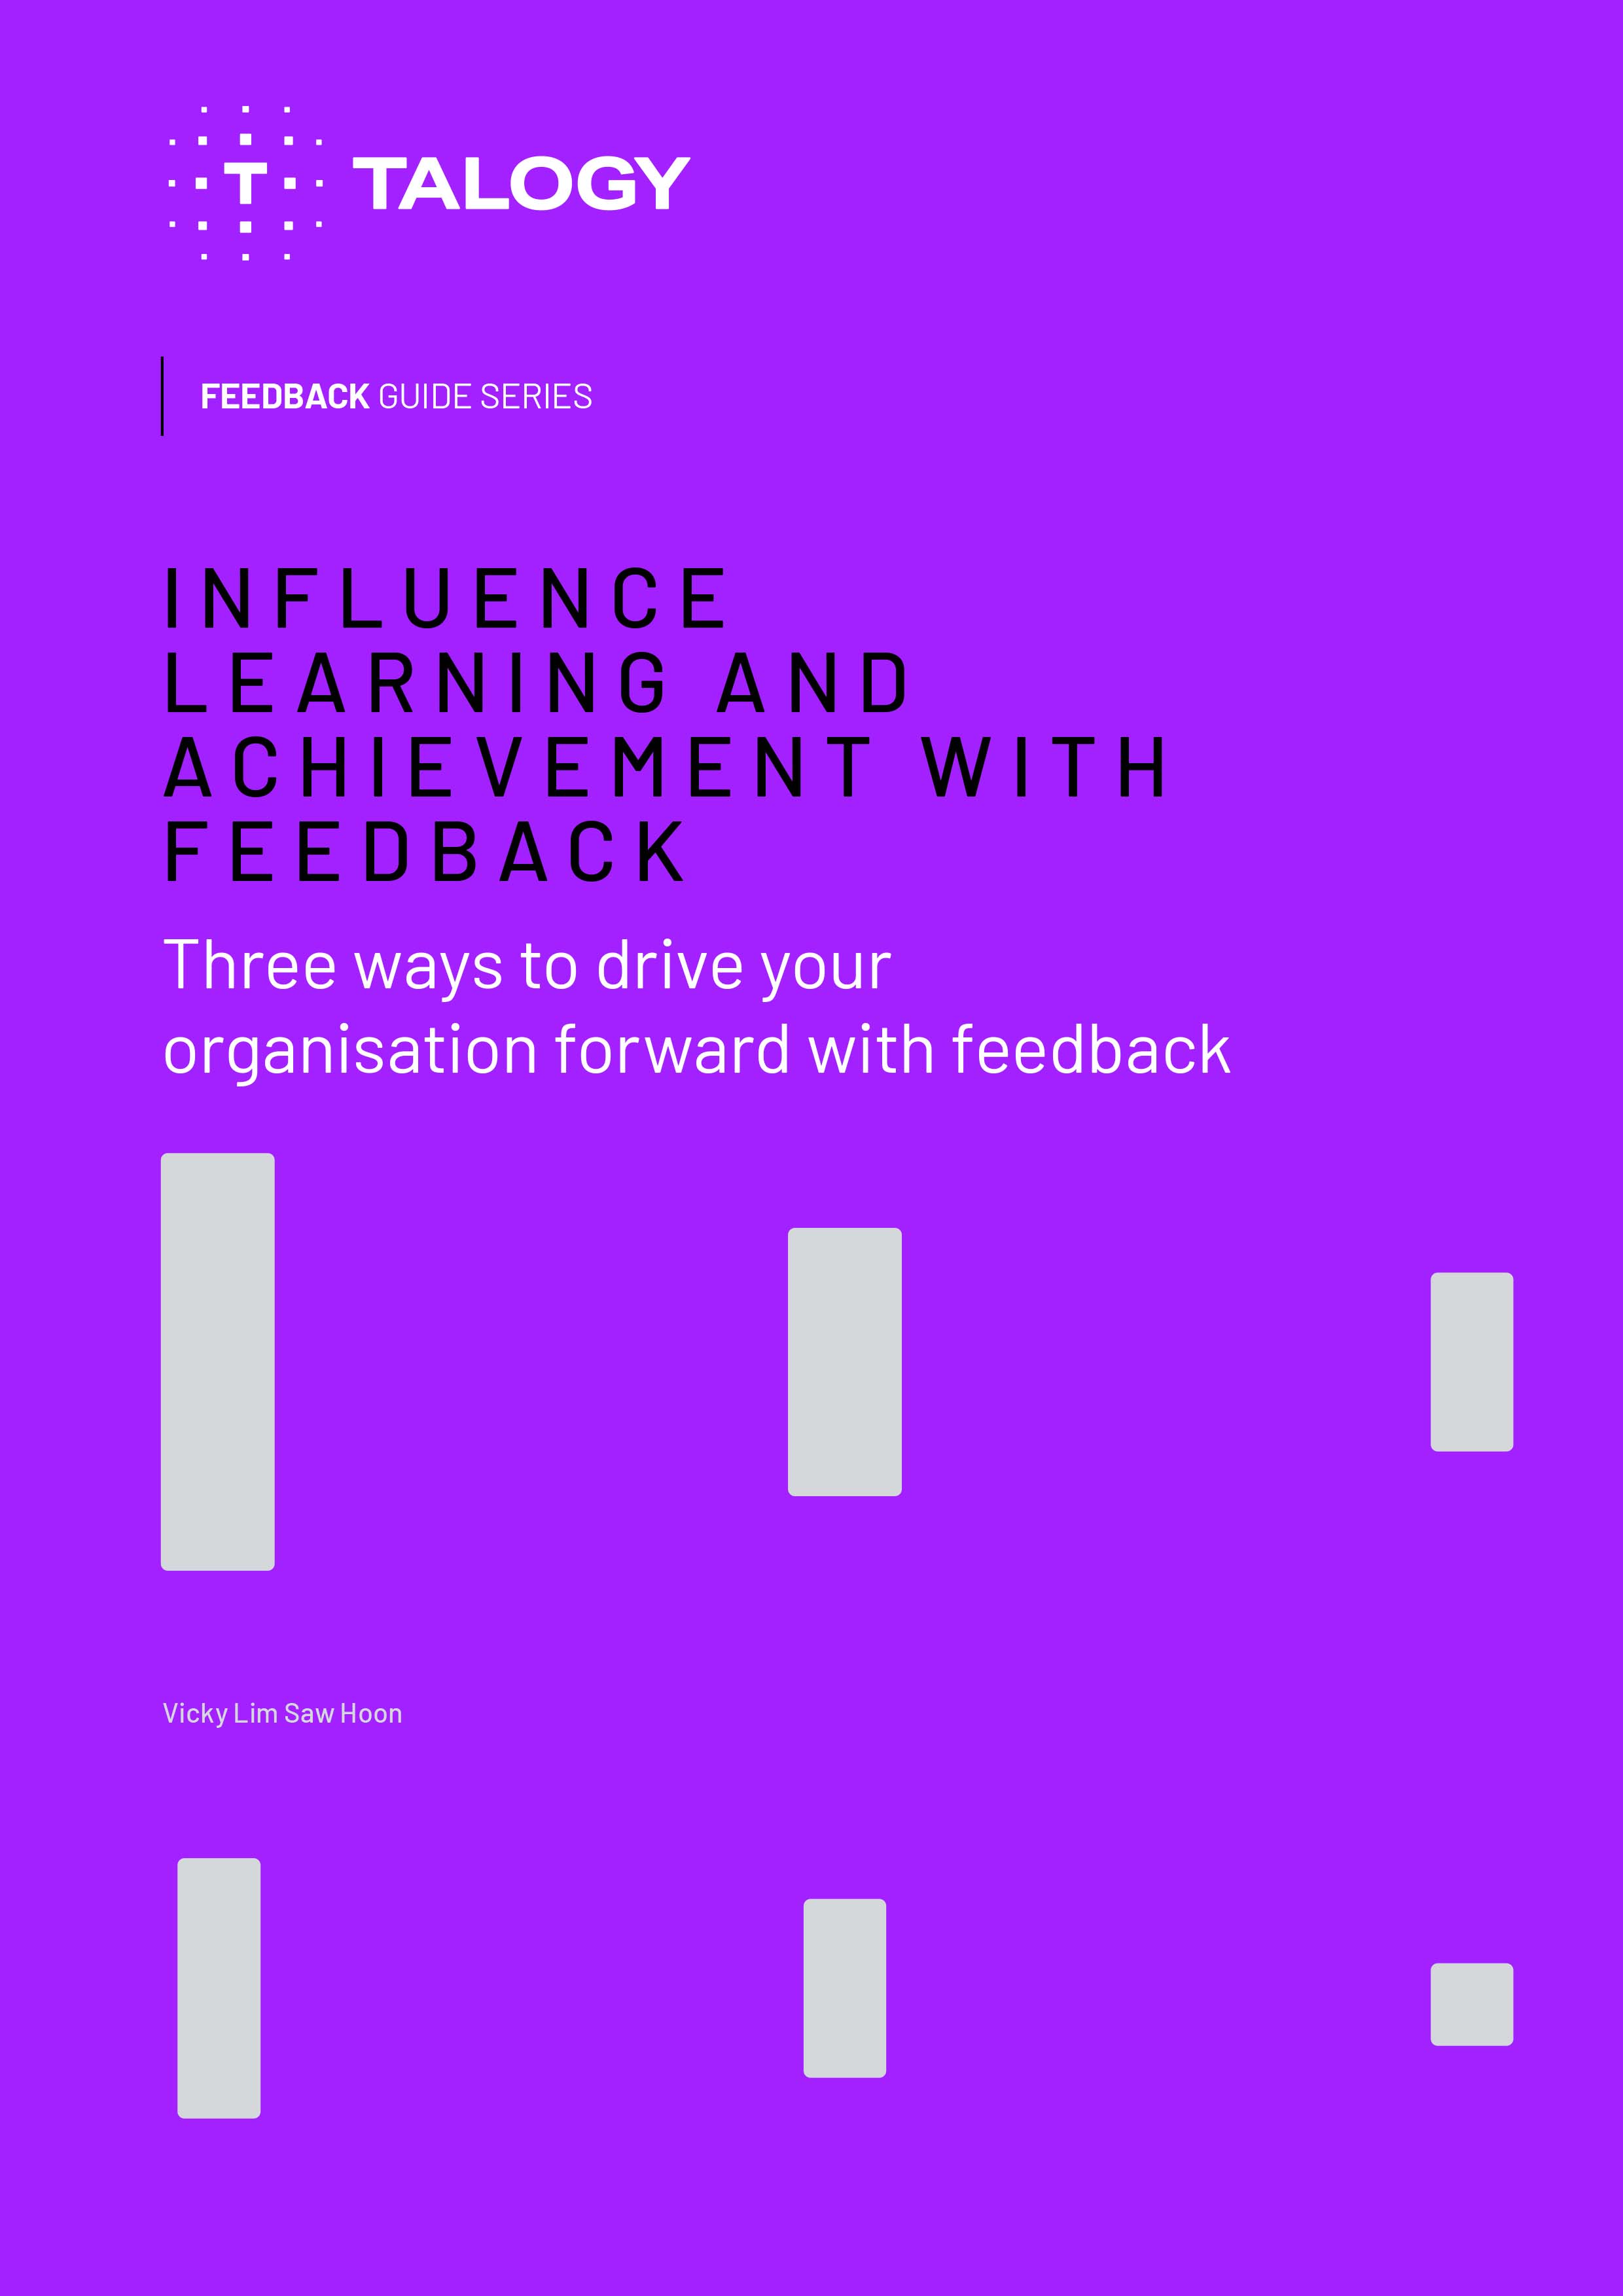 Influence learning achievement with feedback guide cover